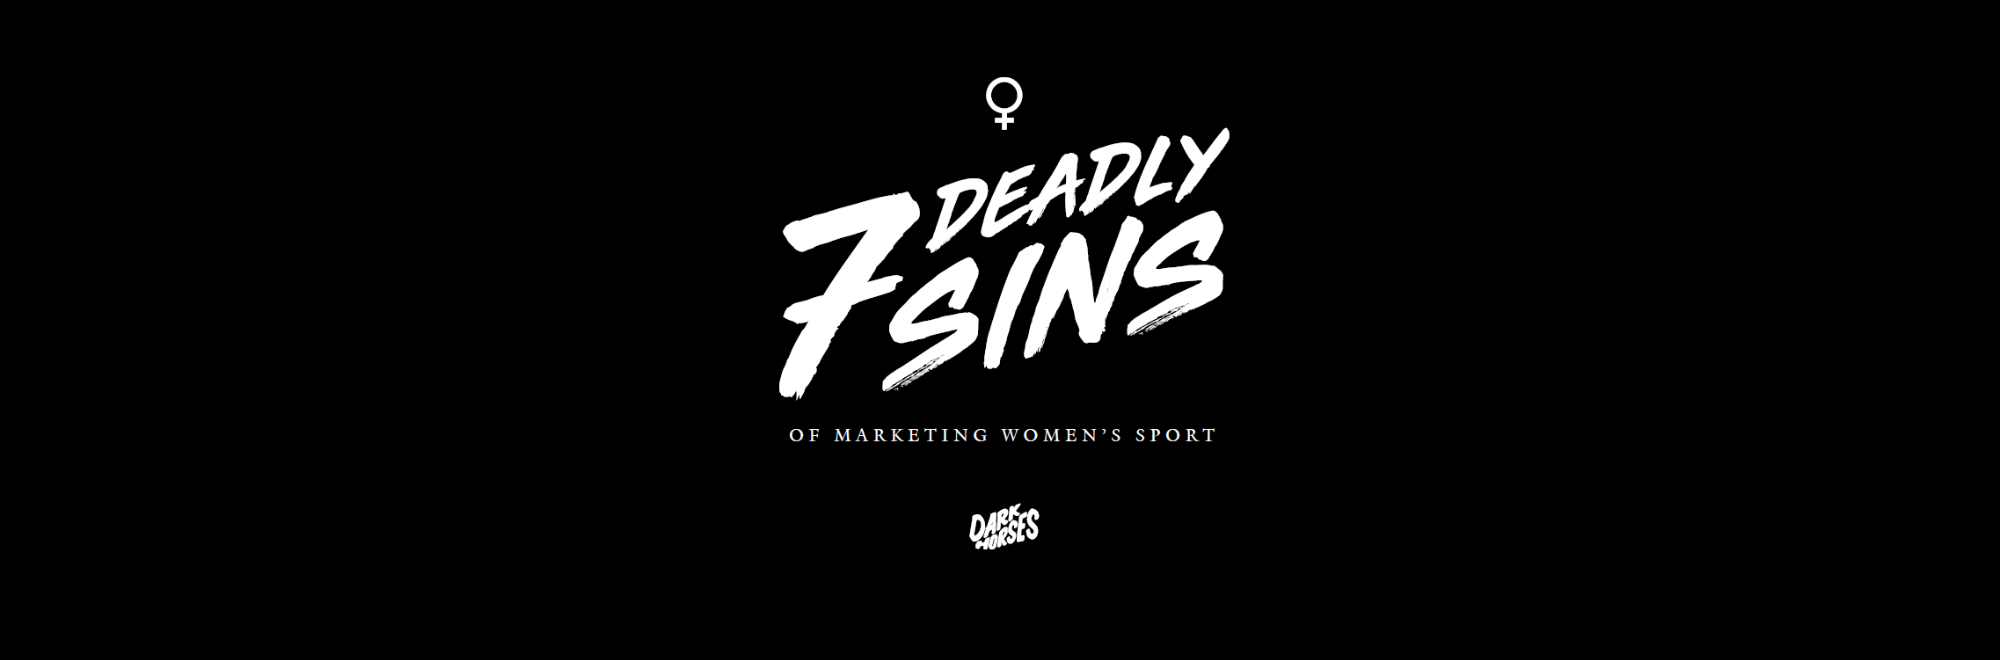 The 7 sins of women’s sports marketing: charity, prophecy, servitude, unity, chastity, penury and lust